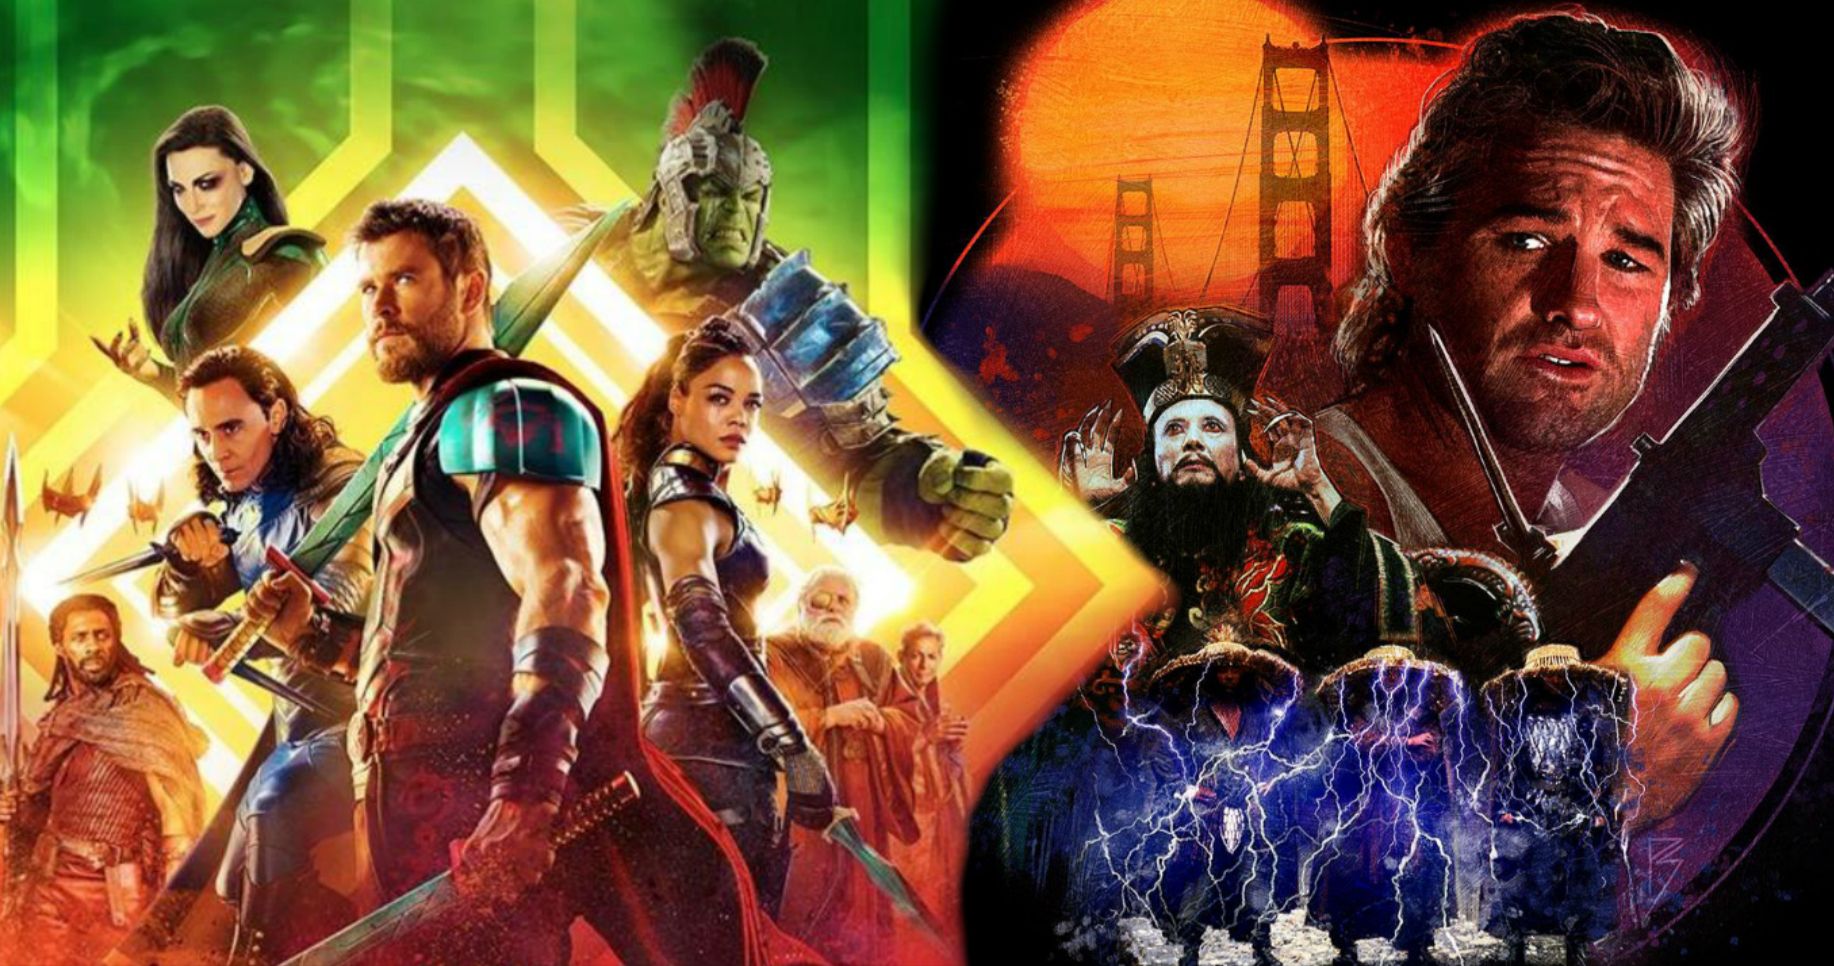 Thor: Ragnarok Owes Its Soul to Led Zeppelin, Big Trouble in Little China and Jack Kirby